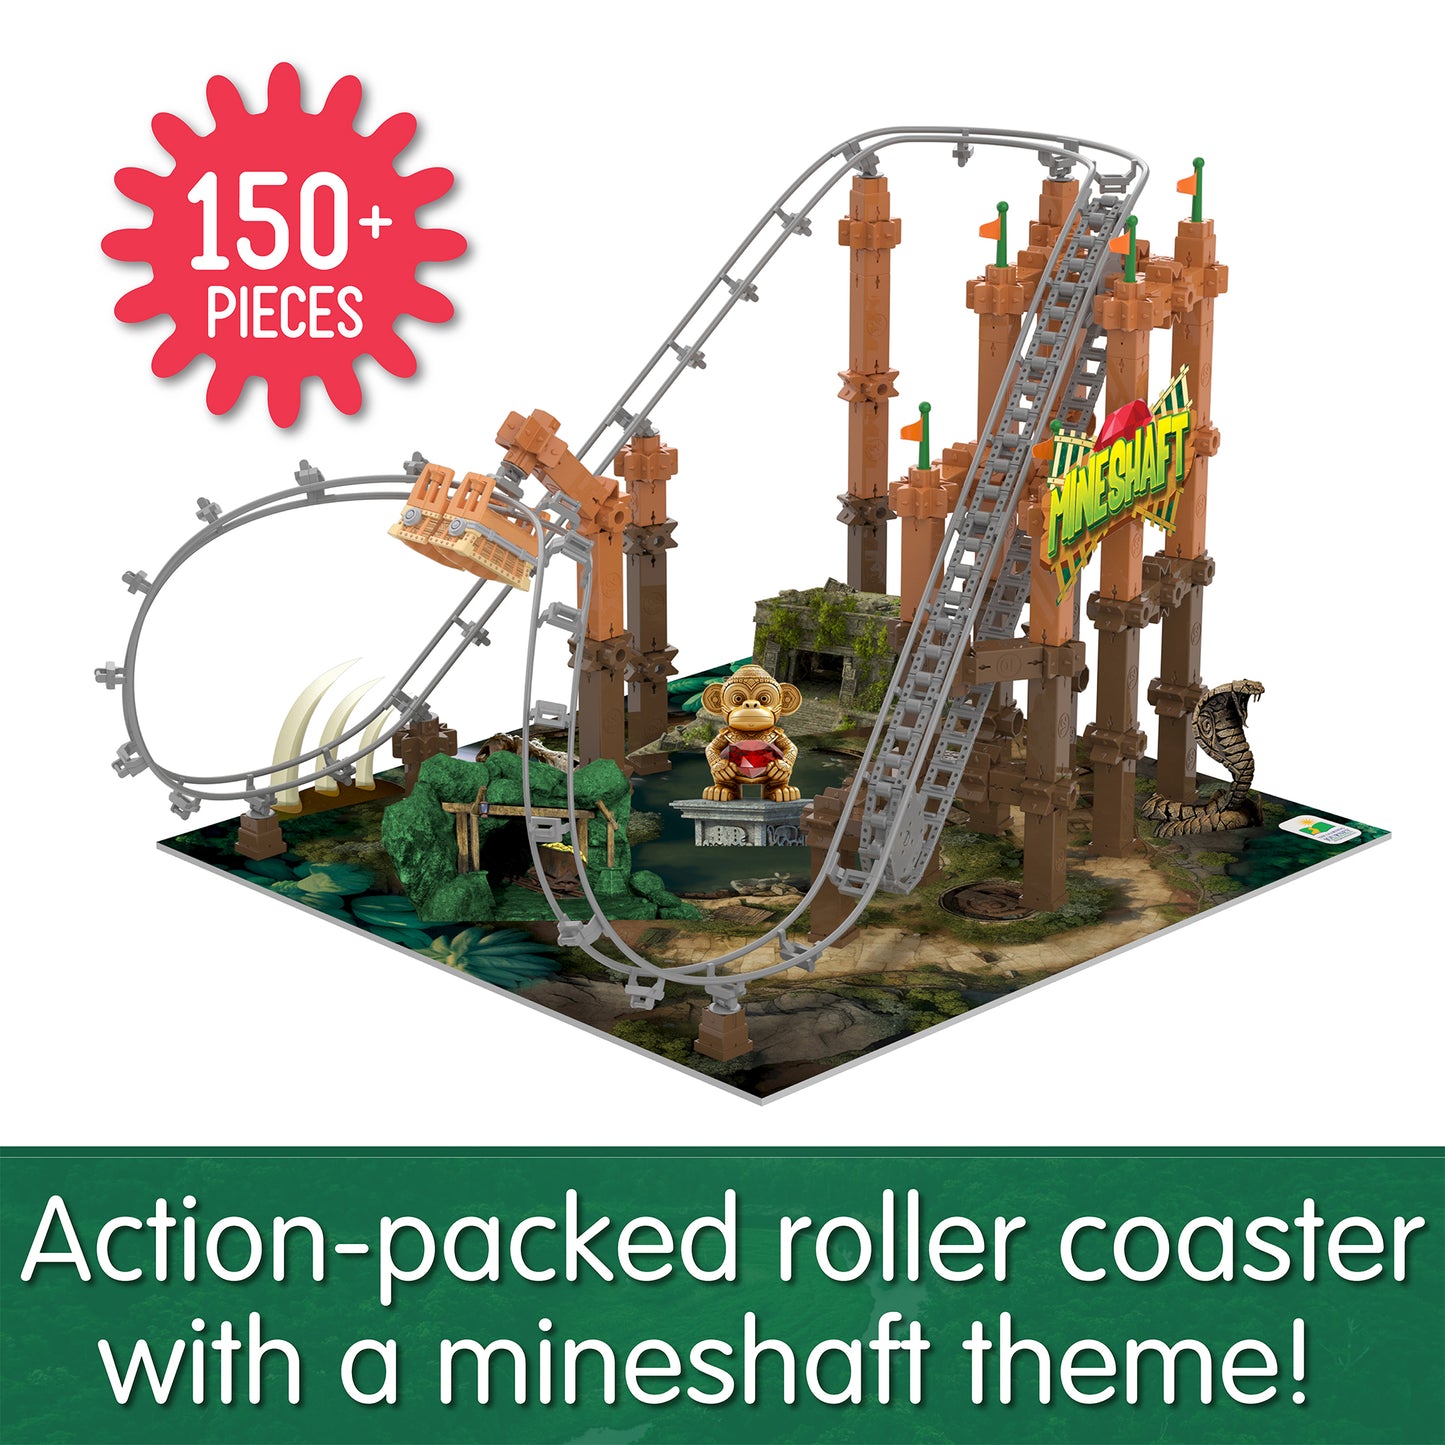 Infographic about Mineshaft's product and packaging